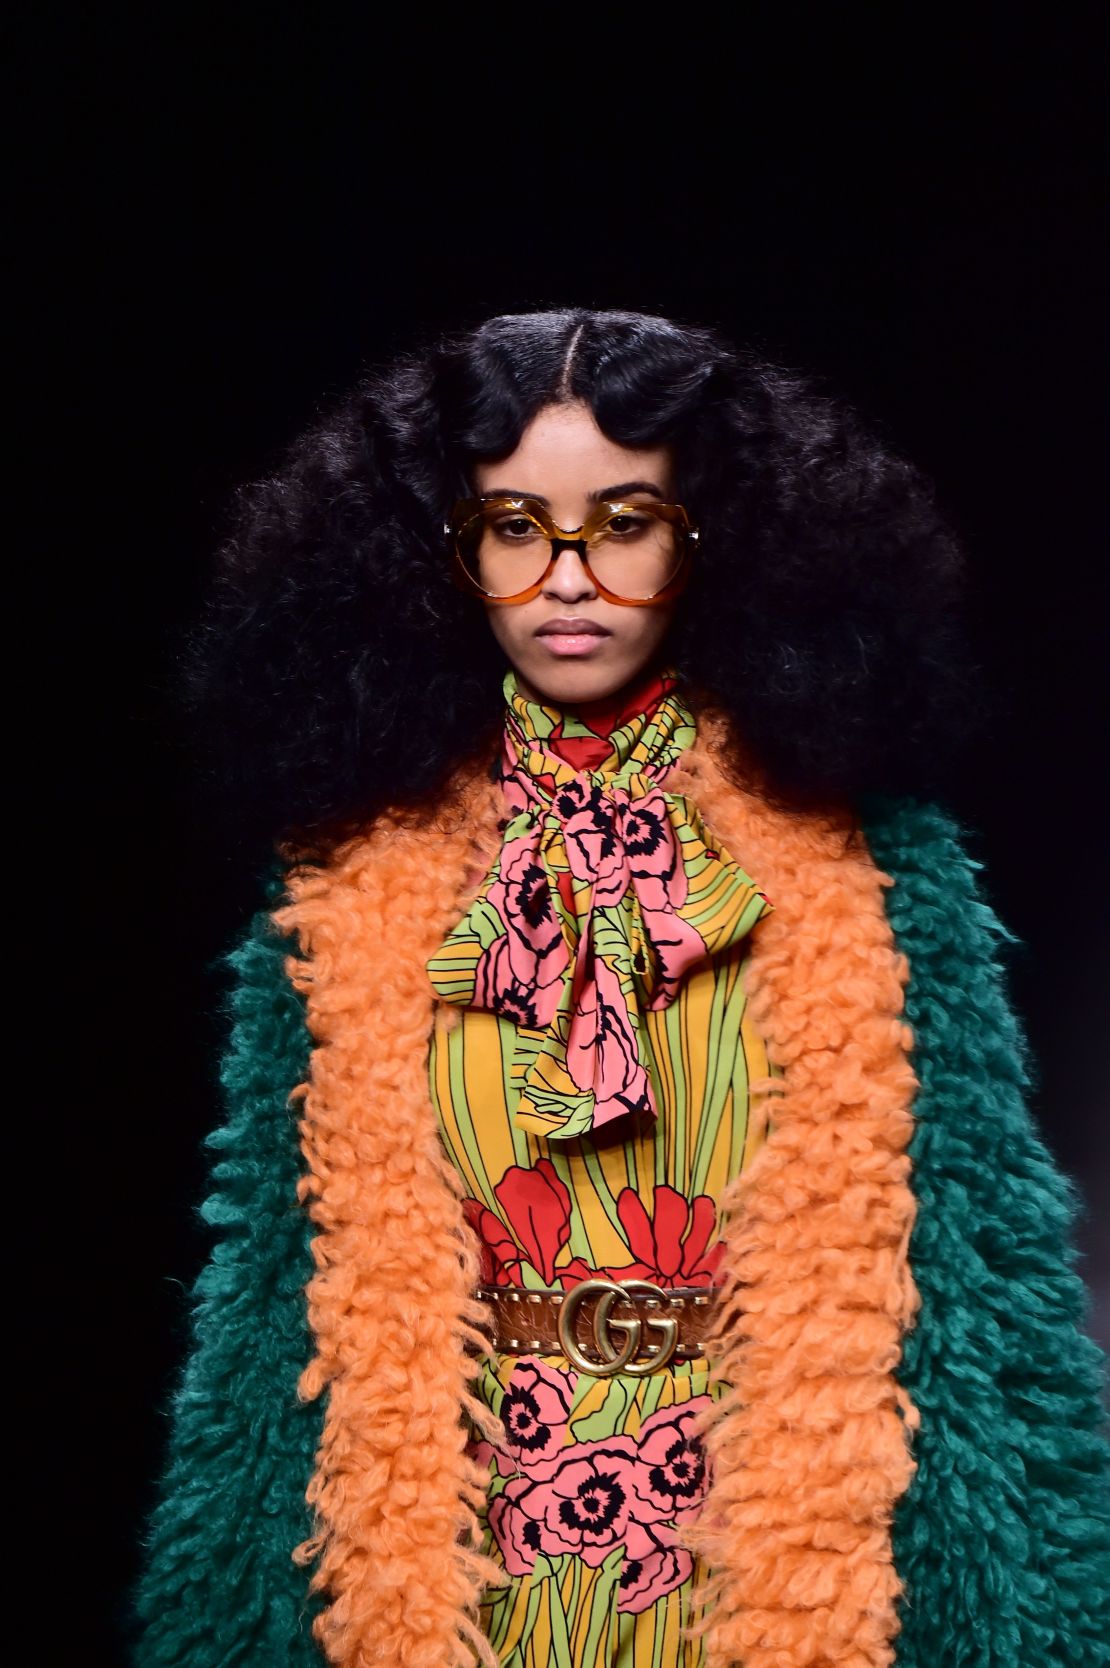 Gucci during the Autumn-Winter 2016